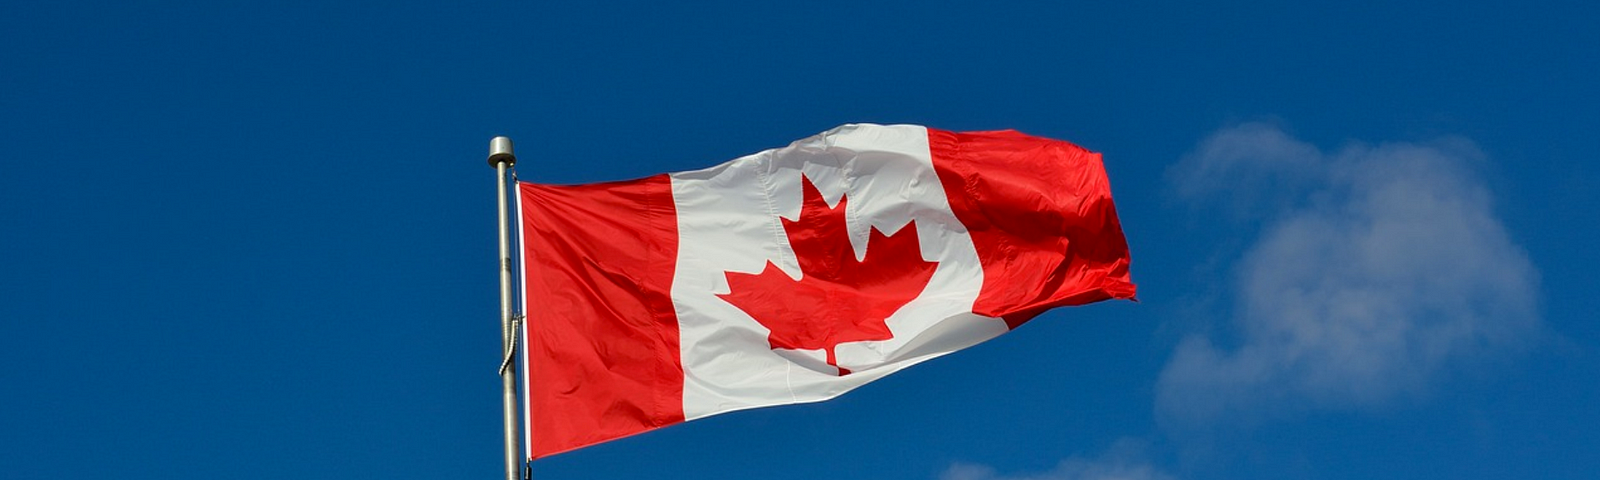 The Canadian flag in front of the blue sky